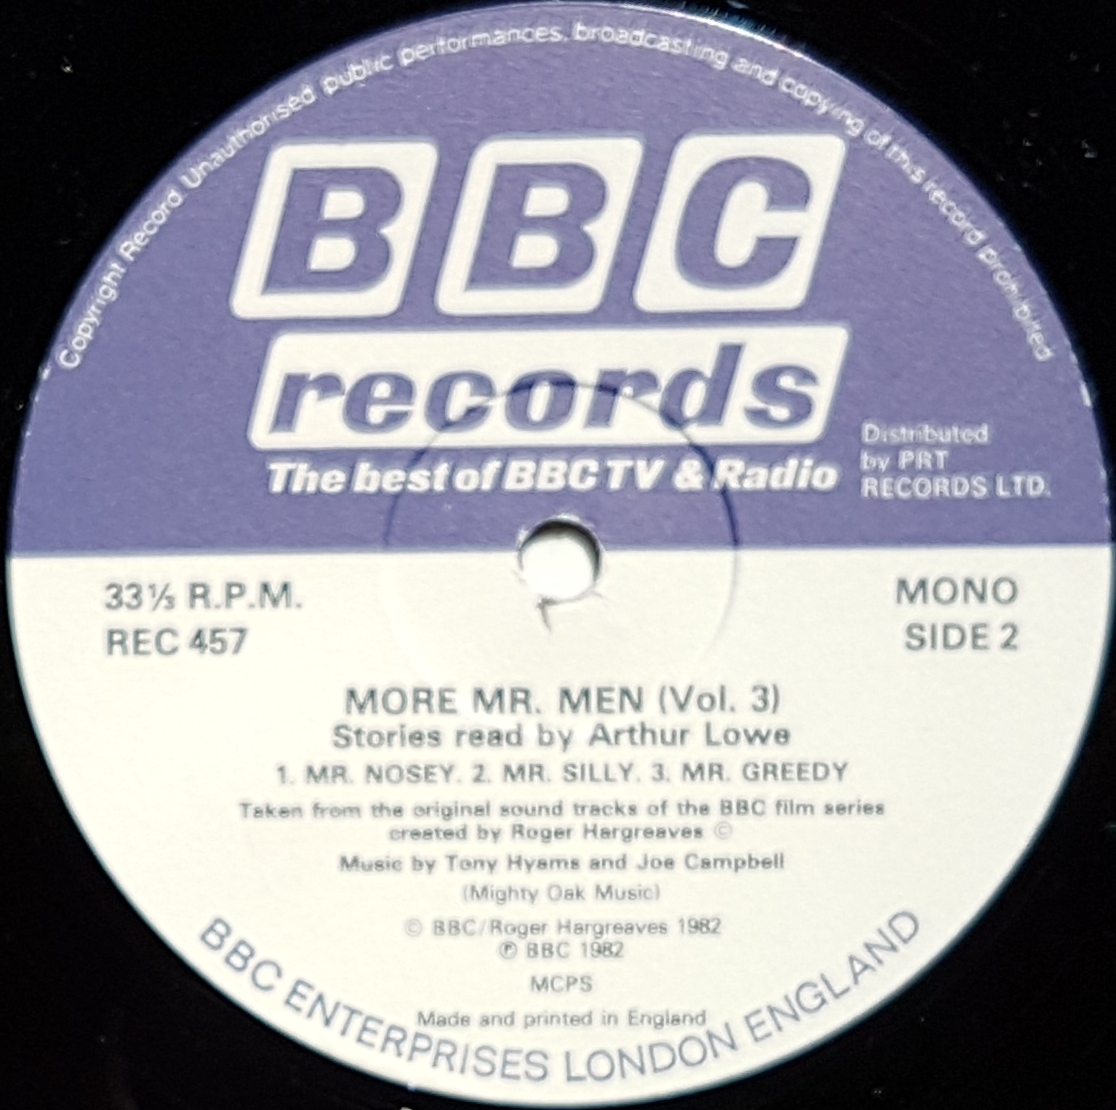 BBC Records and Tapes2 label